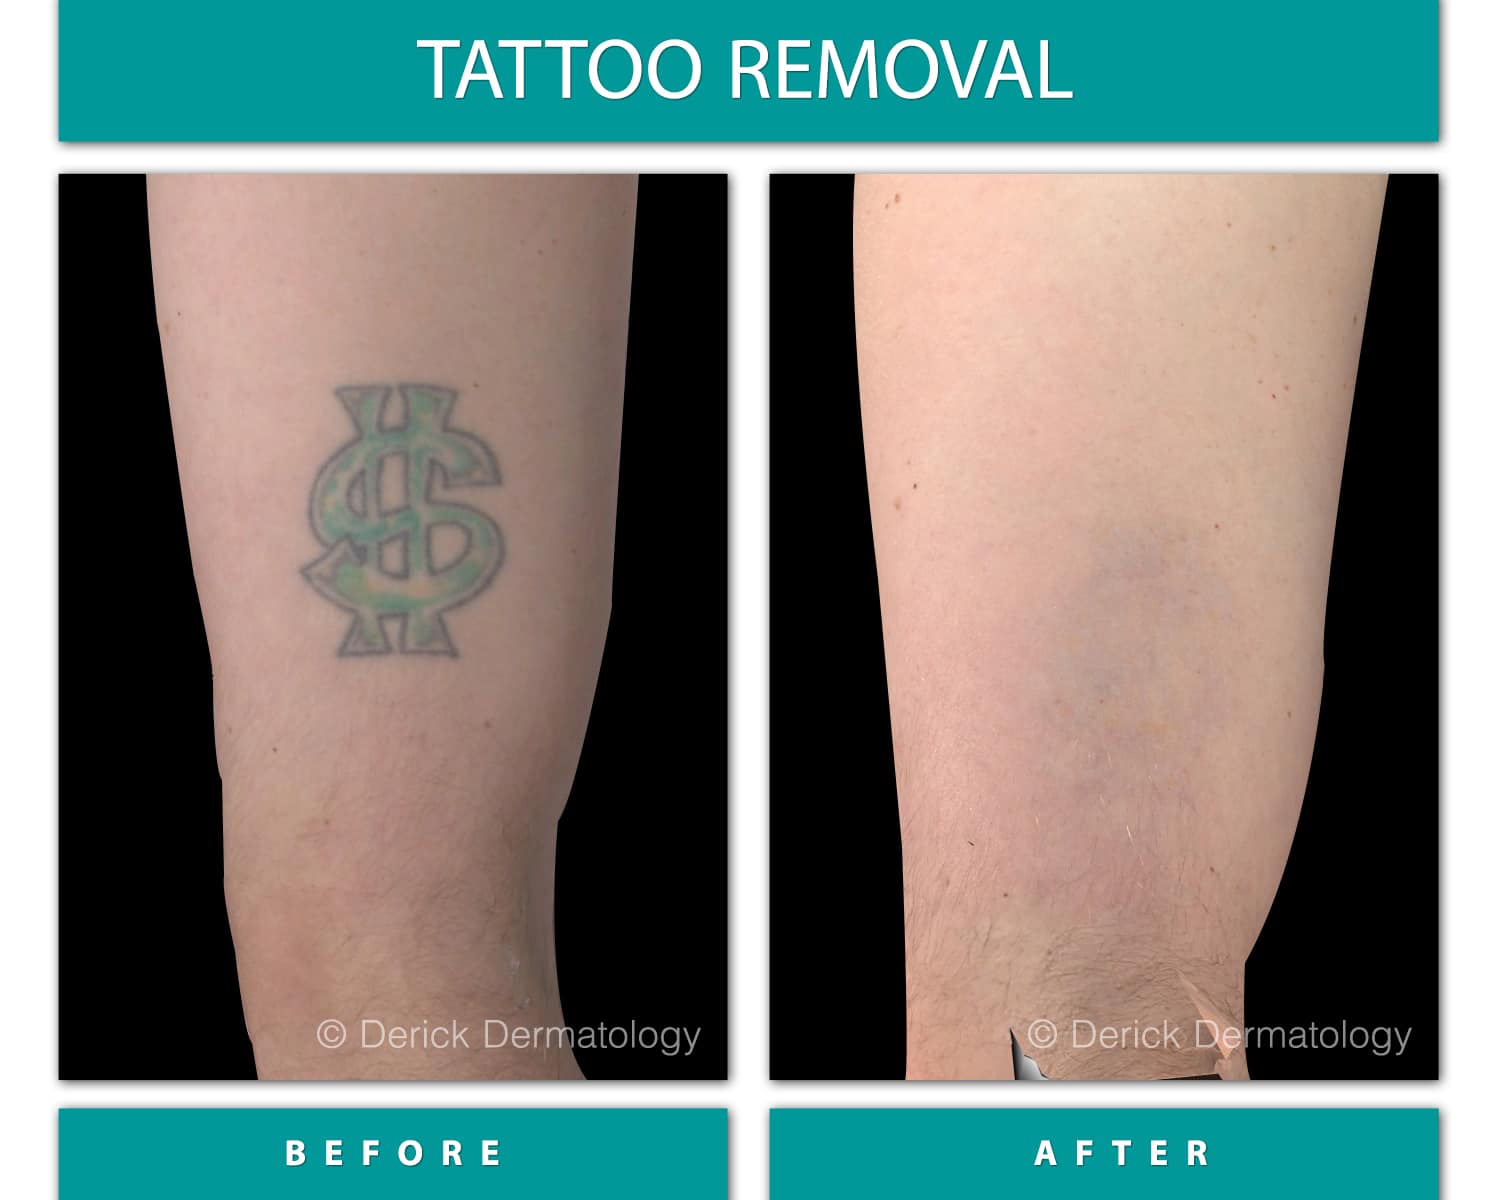 Before and After Image of Tattoo Removal